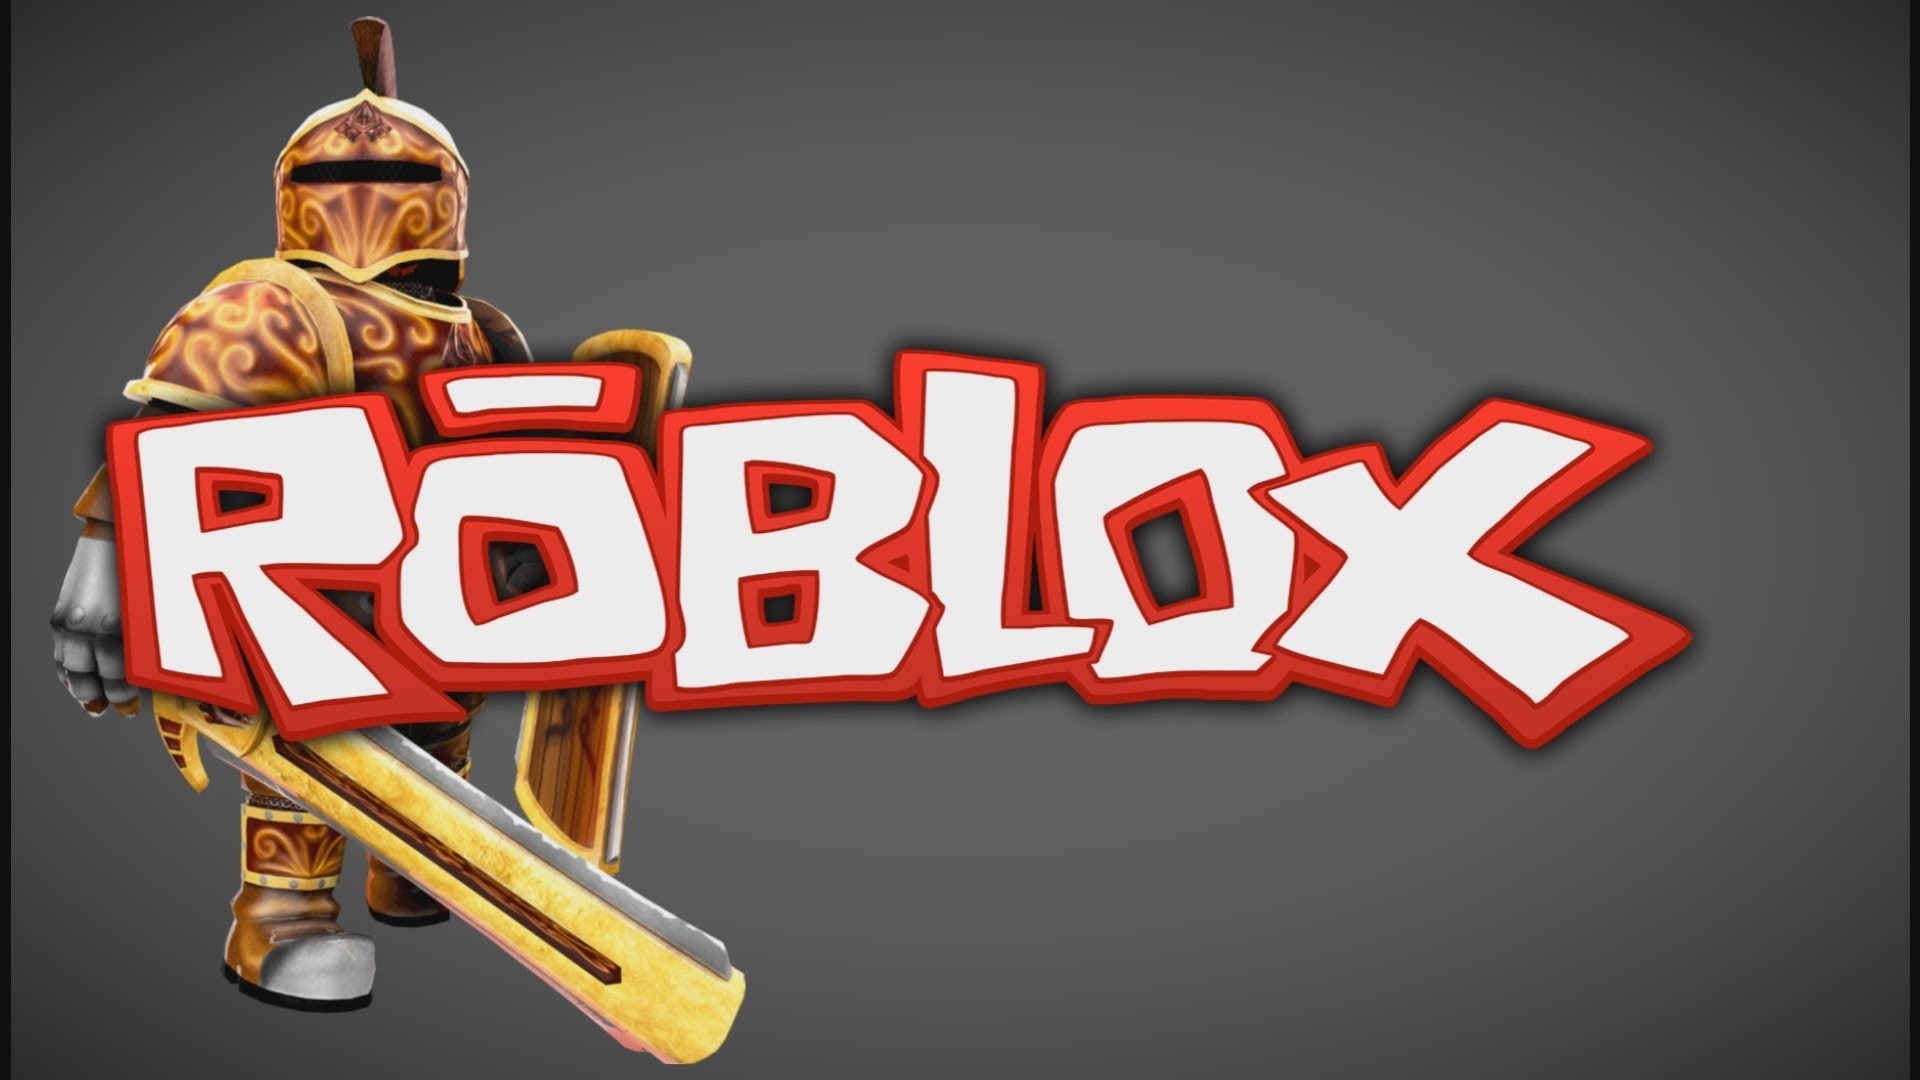 Cool Wallpapers Roblox Roblox Wallpapers Wallpaper Cave Download For Free On All Your Devices Computer Smartphone Or Tablet Kumpulan Alamat Grapari Telkomsel Dan Alamat Bank - background cool roblox pics